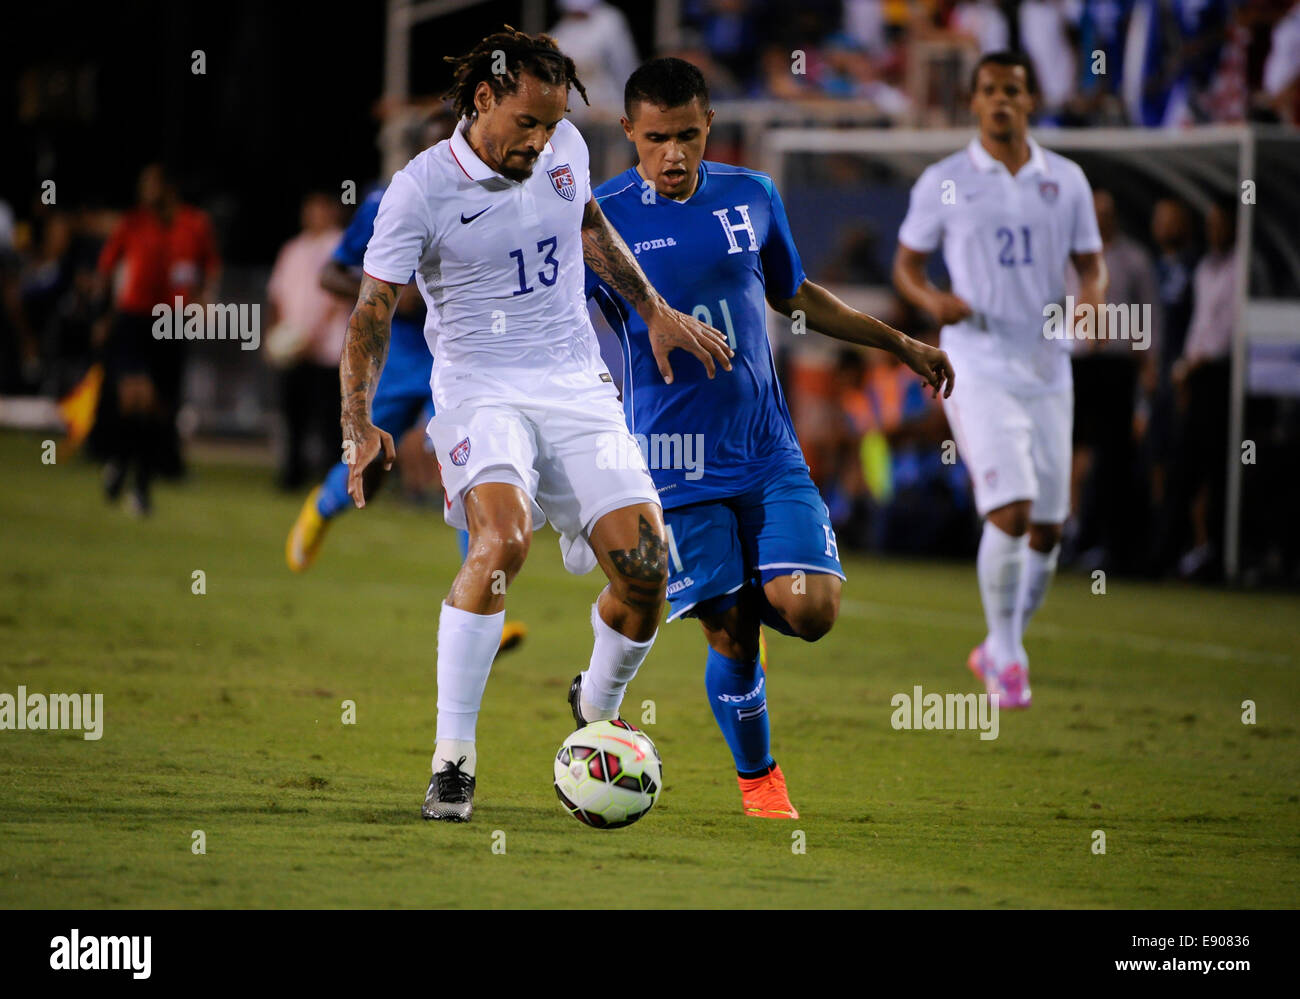 Florida, USA. 14th Oct, 2014. United States Midfielder Jermaine Jones (13) and Honduras Forward Roger Rojas (21) fight for the ball during the international friendly between the US Men's National Team and Honduras at FAU Stadium in Boca Raton, Florida © Action Plus Sports/Alamy Live News Stock Photo